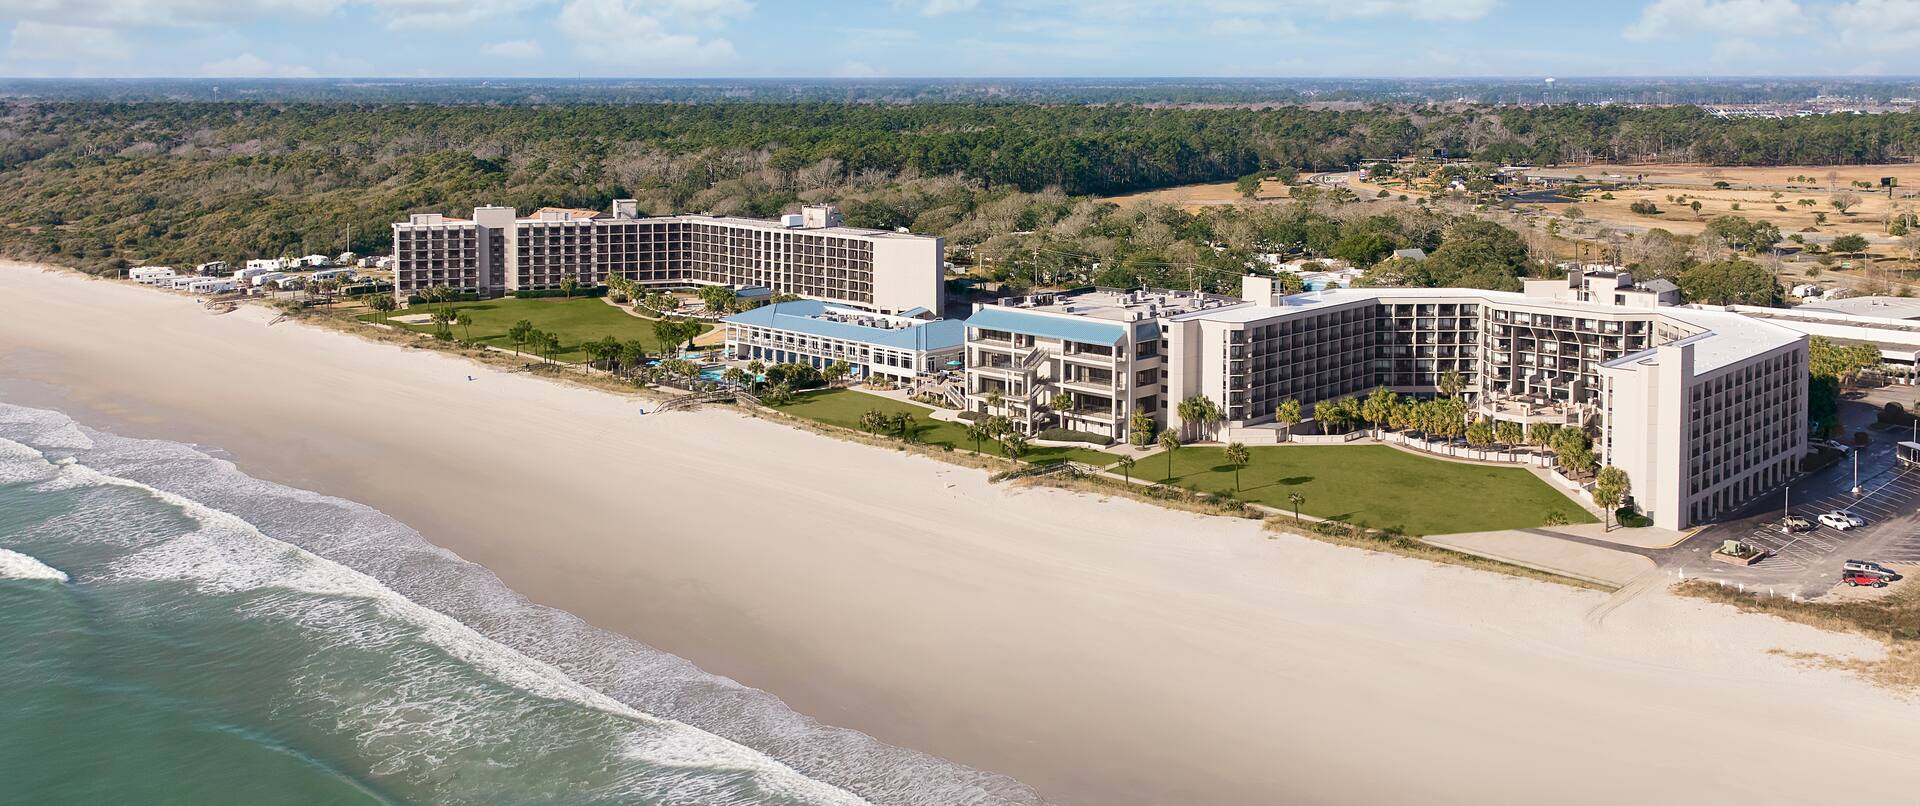 Panoramic View of Beach and Hotel Building at Daytime